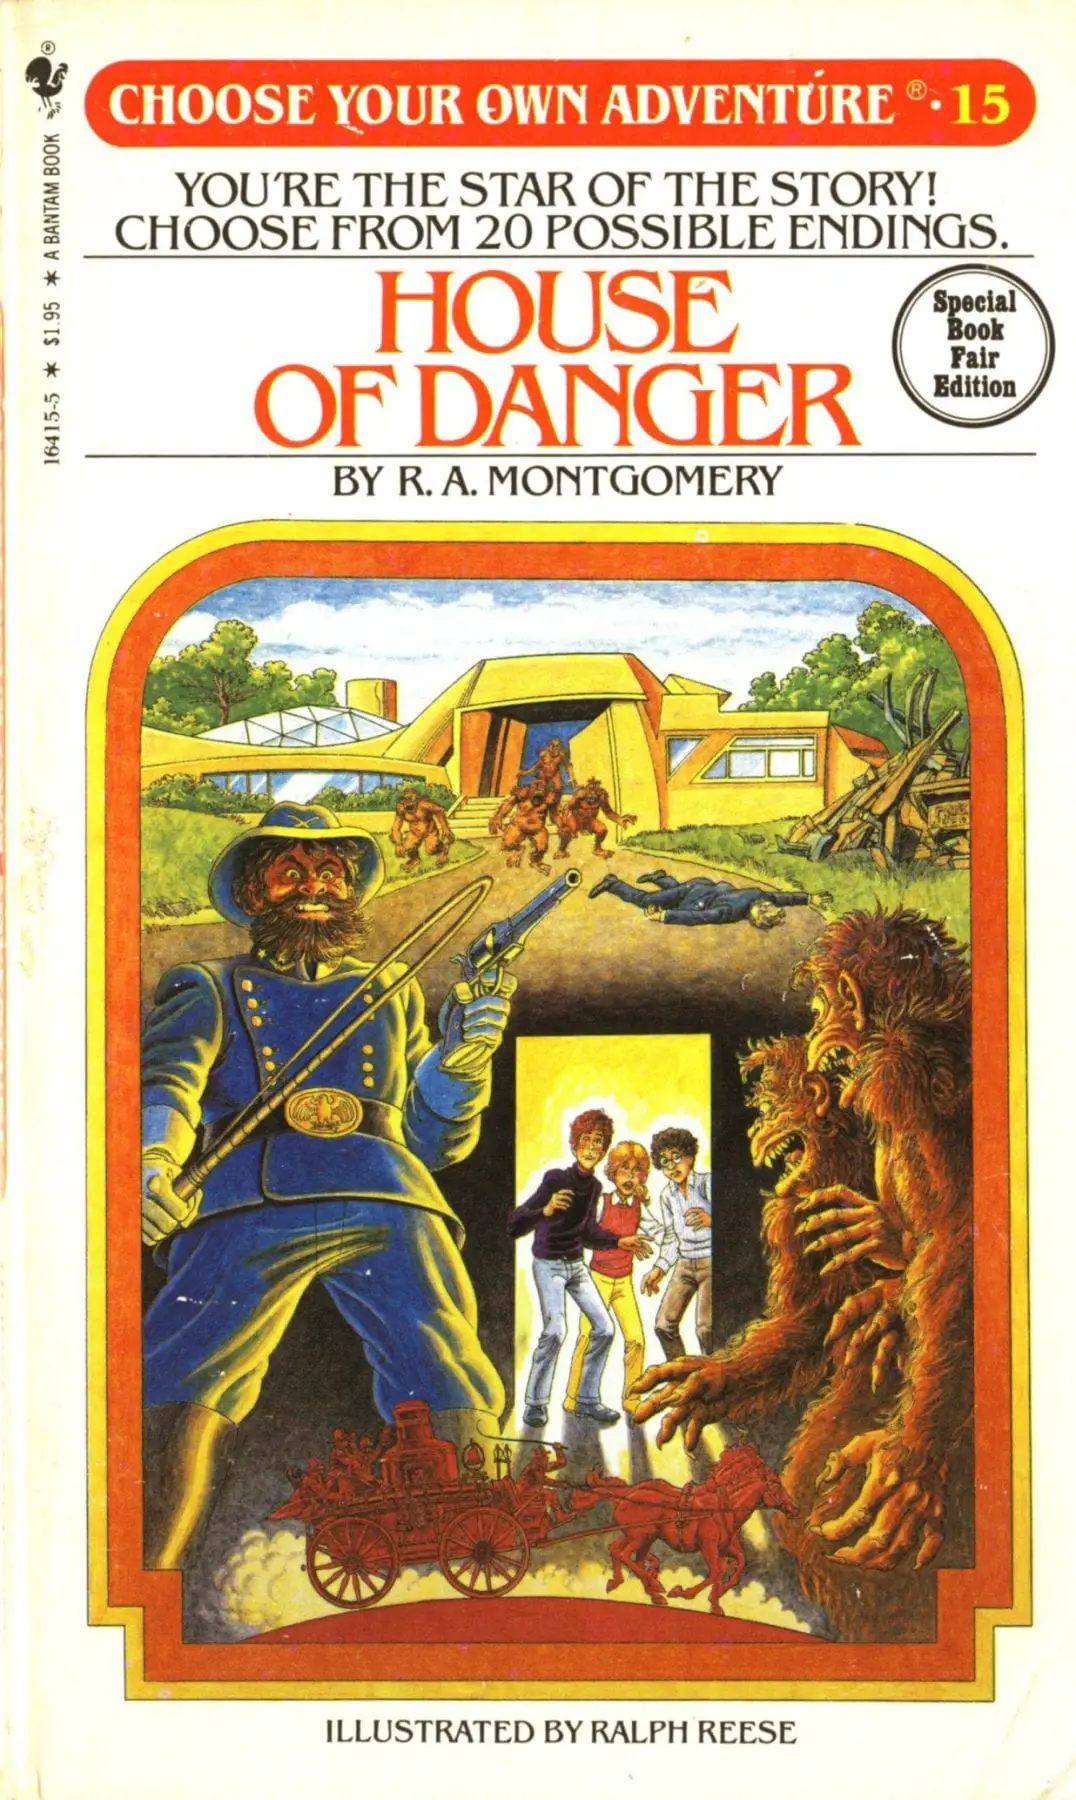 Choose your own Adventure, House of Danger